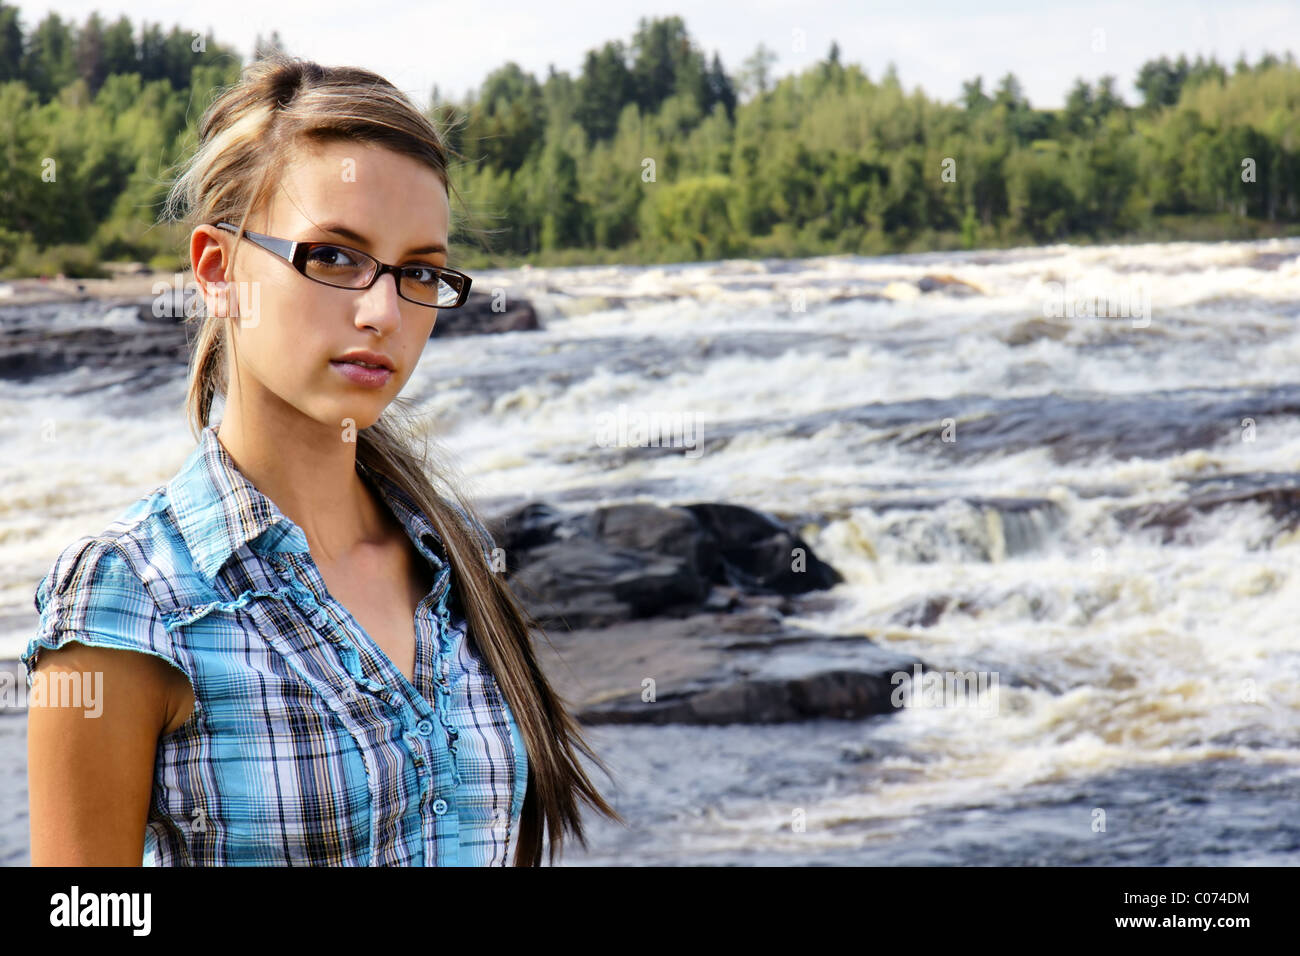 Young friendly brunette looking at camera in front of beautiful white waters waterfall landscape. Stock Photo